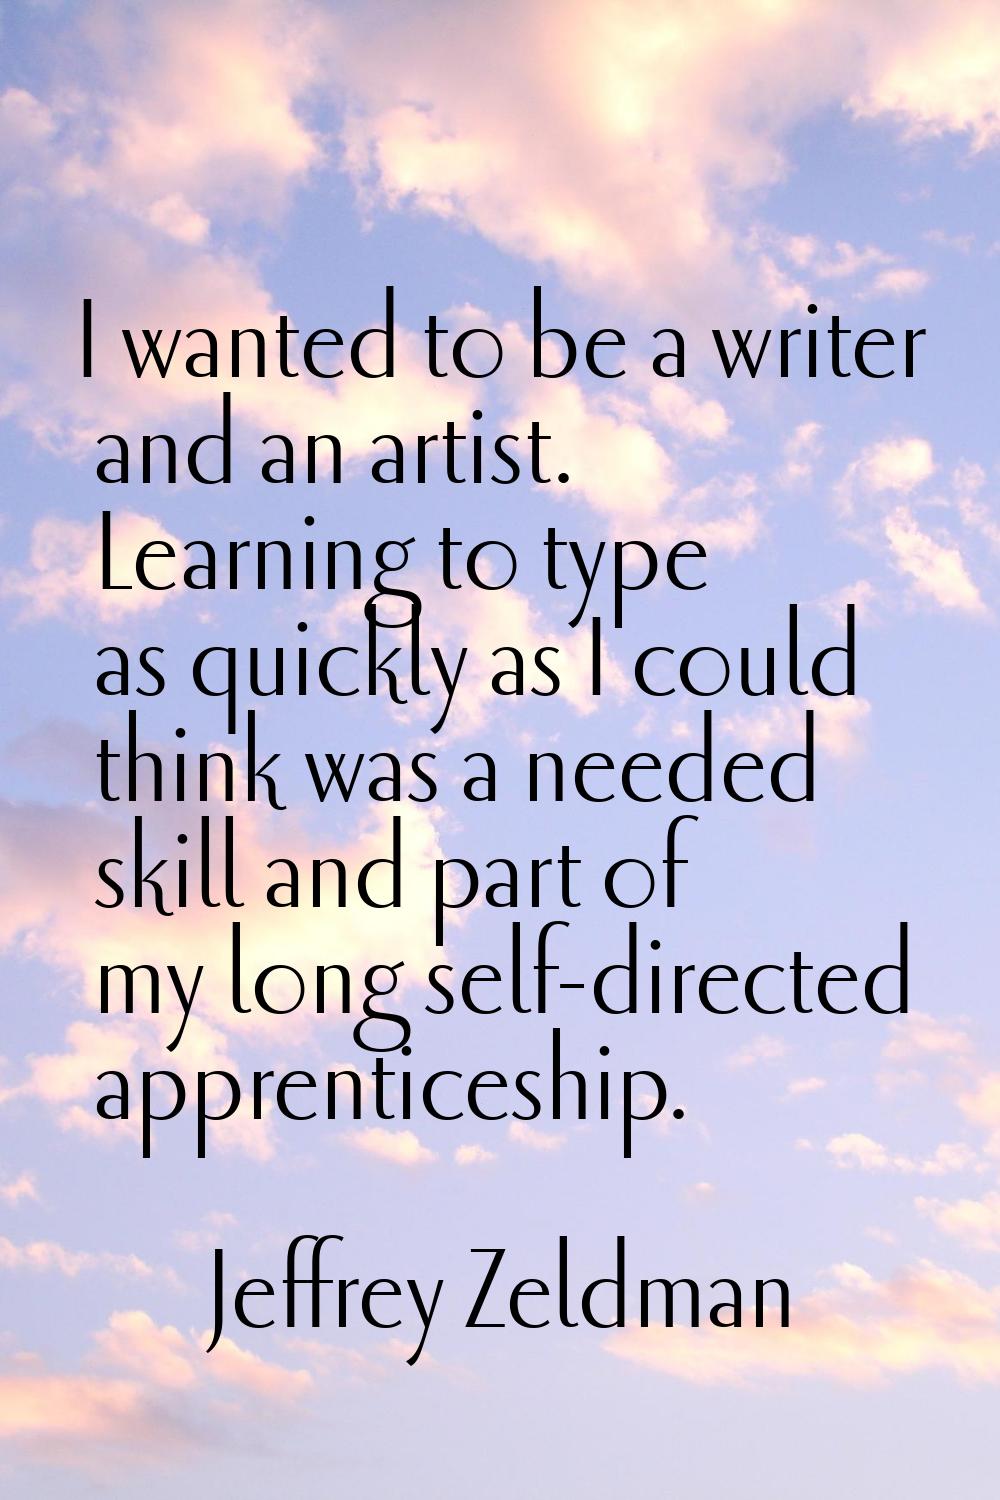 I wanted to be a writer and an artist. Learning to type as quickly as I could think was a needed sk